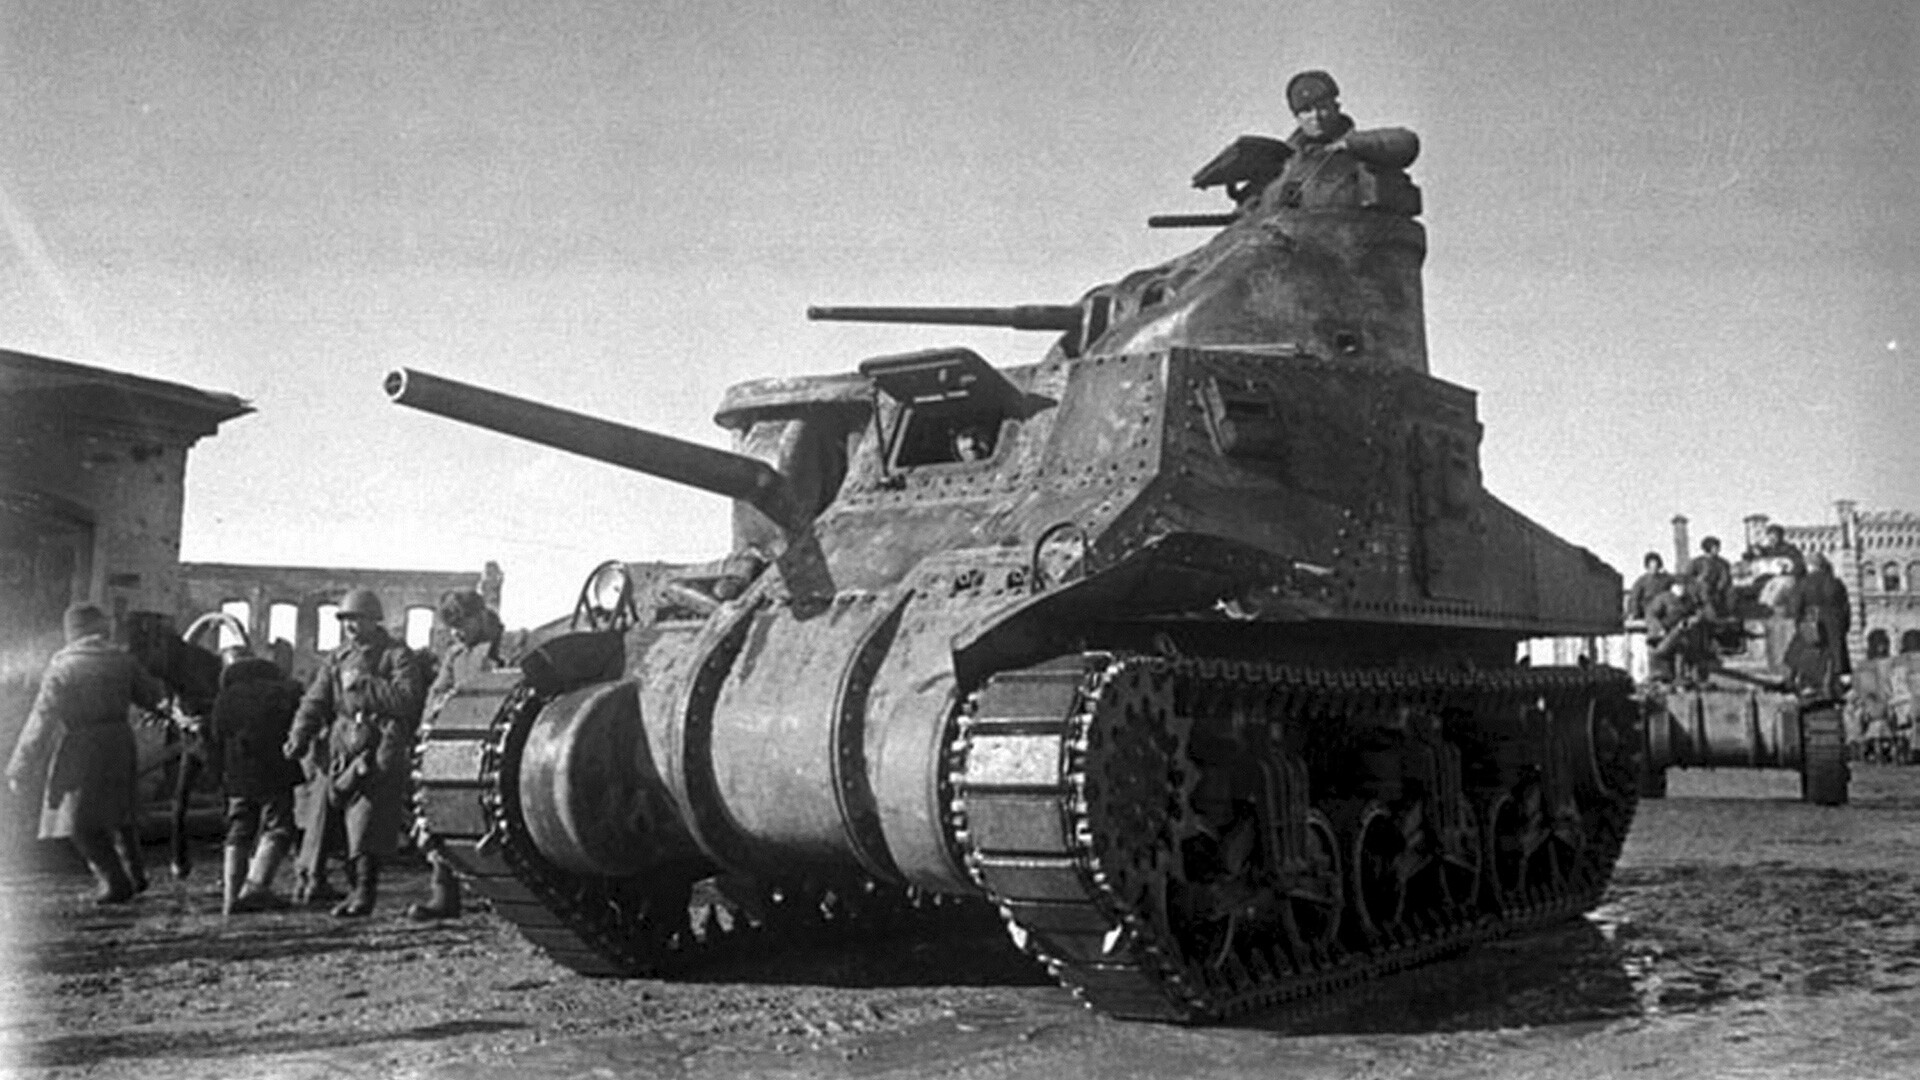 What U.S. & British tanks did the Red Army ride into battle with